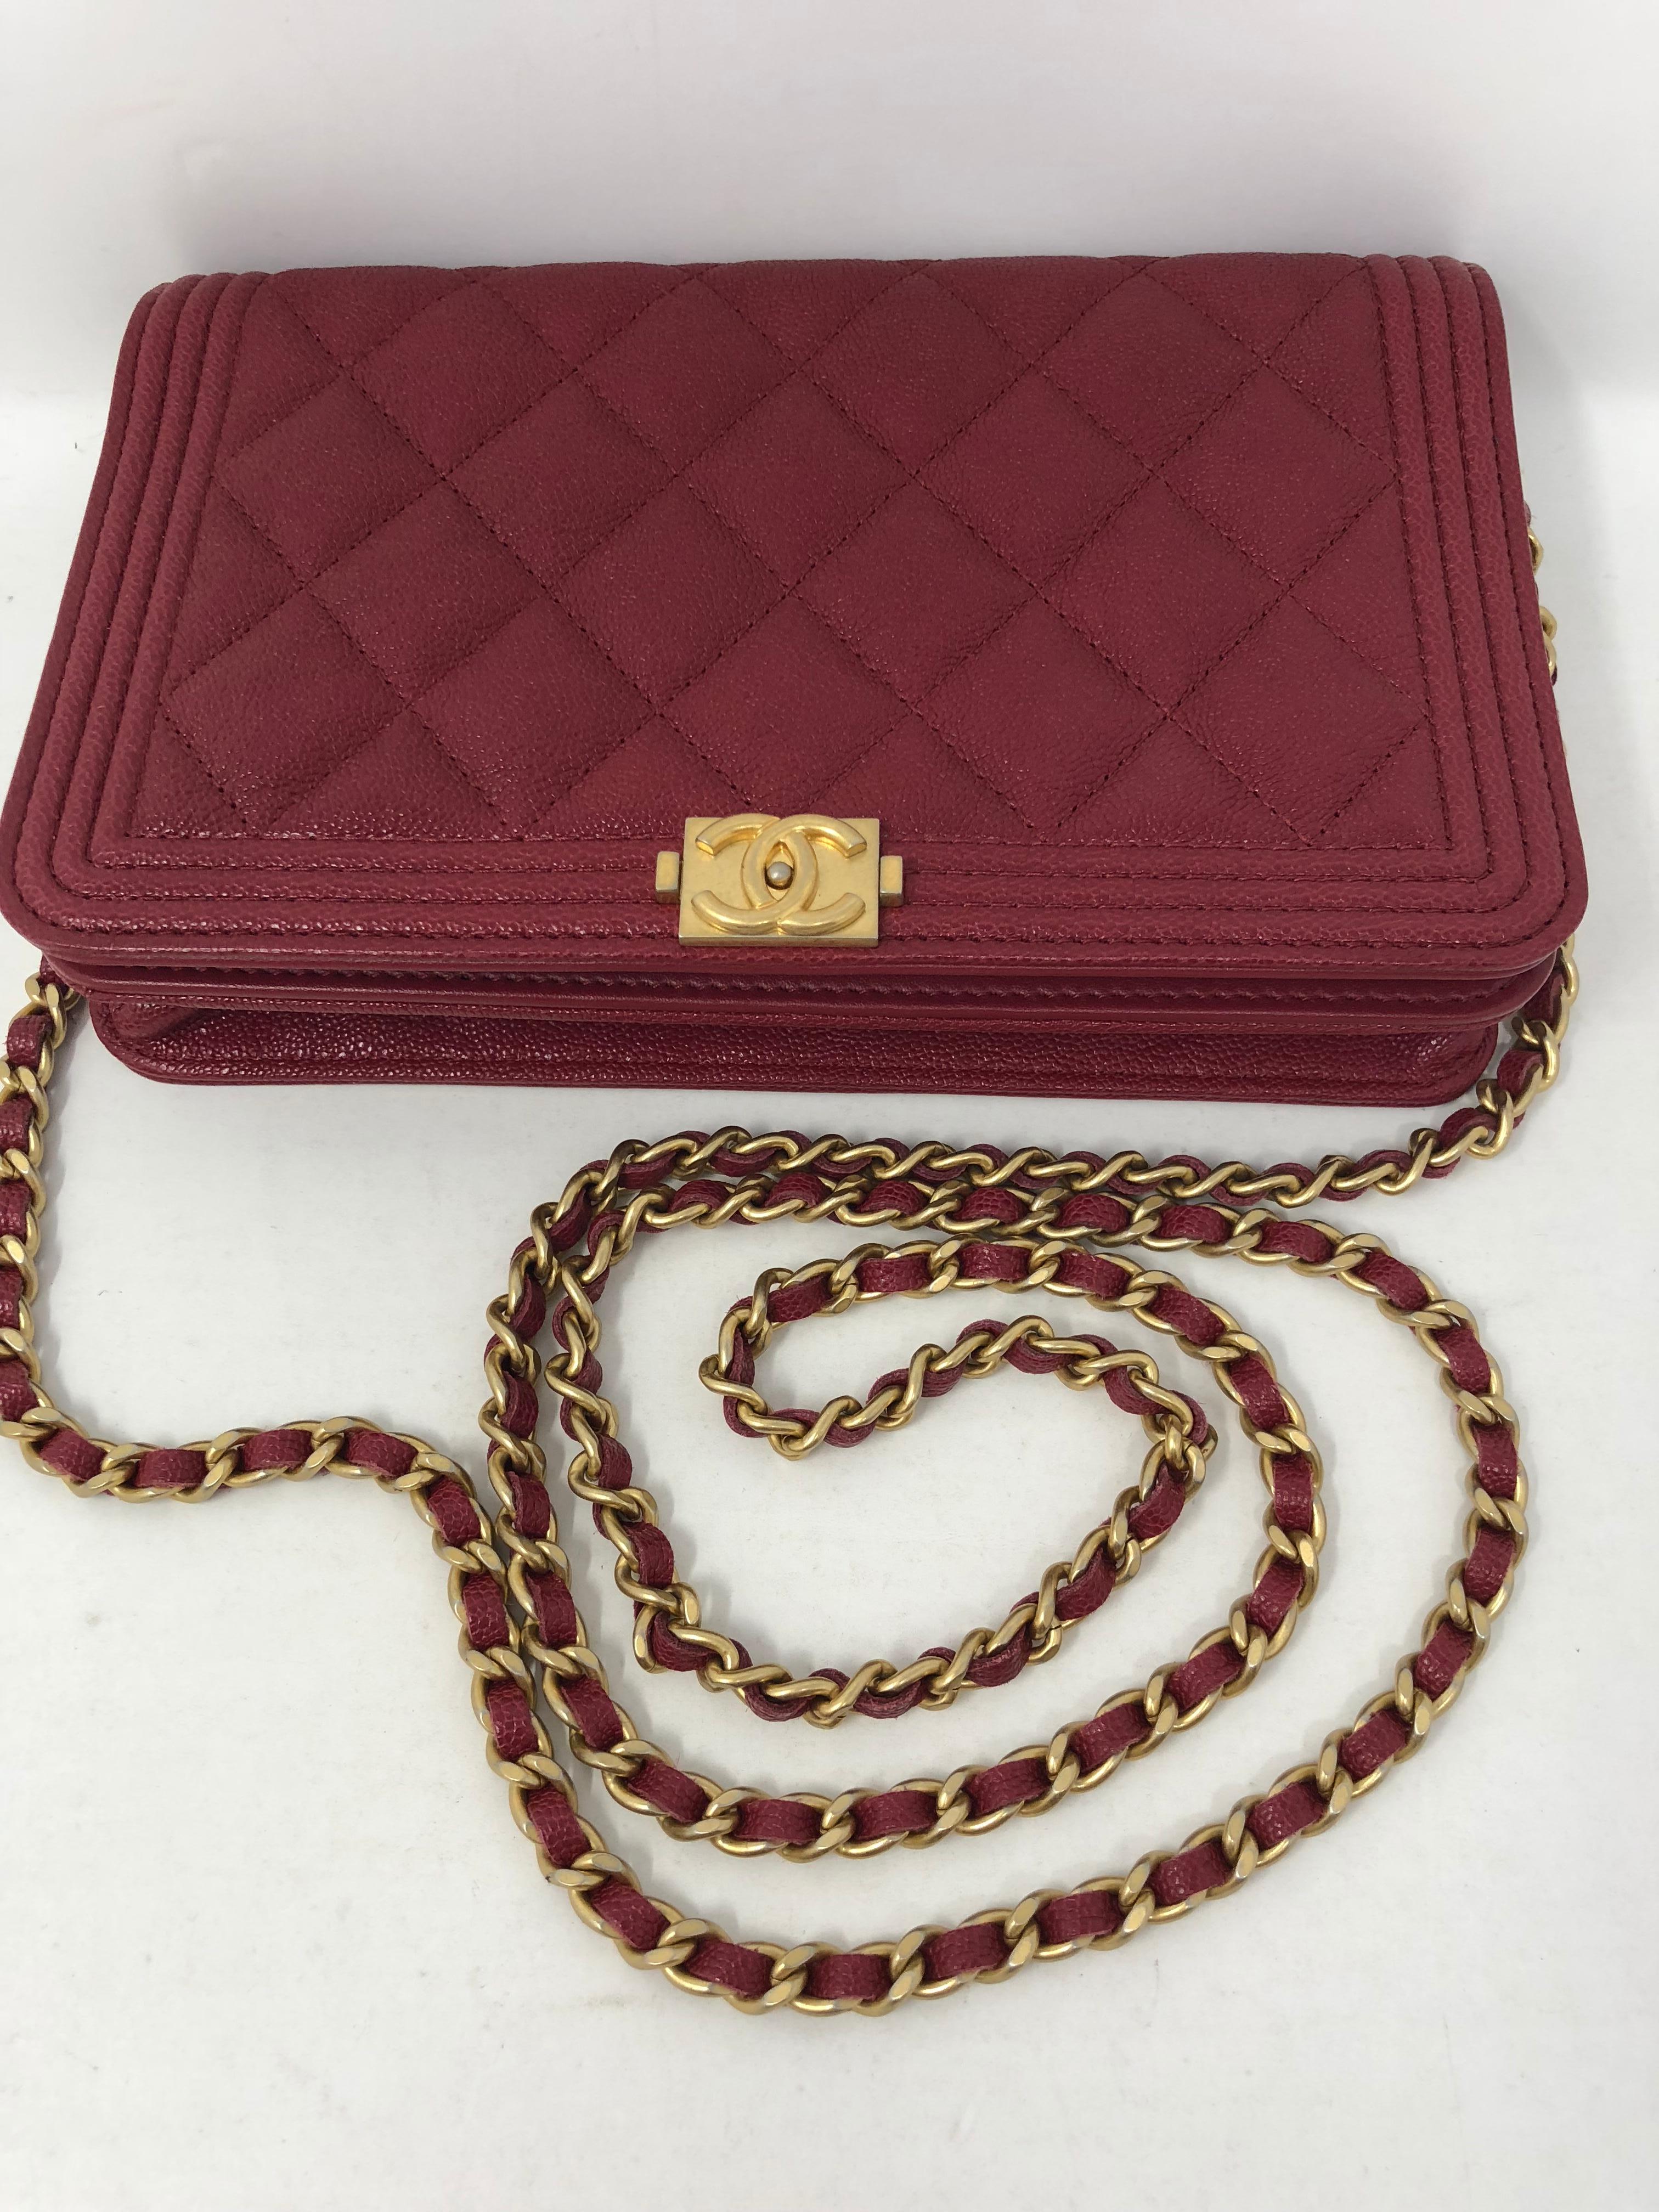 Chanel Red Wallet on a Chain in gold hardware. Brand new never used. Sold out and limited. Includes Chanel authenticity card, original tags, dustbag, and Chanel box. Can be worn as a crossbody or a clutch. Purchased in 2018 and hard to find red